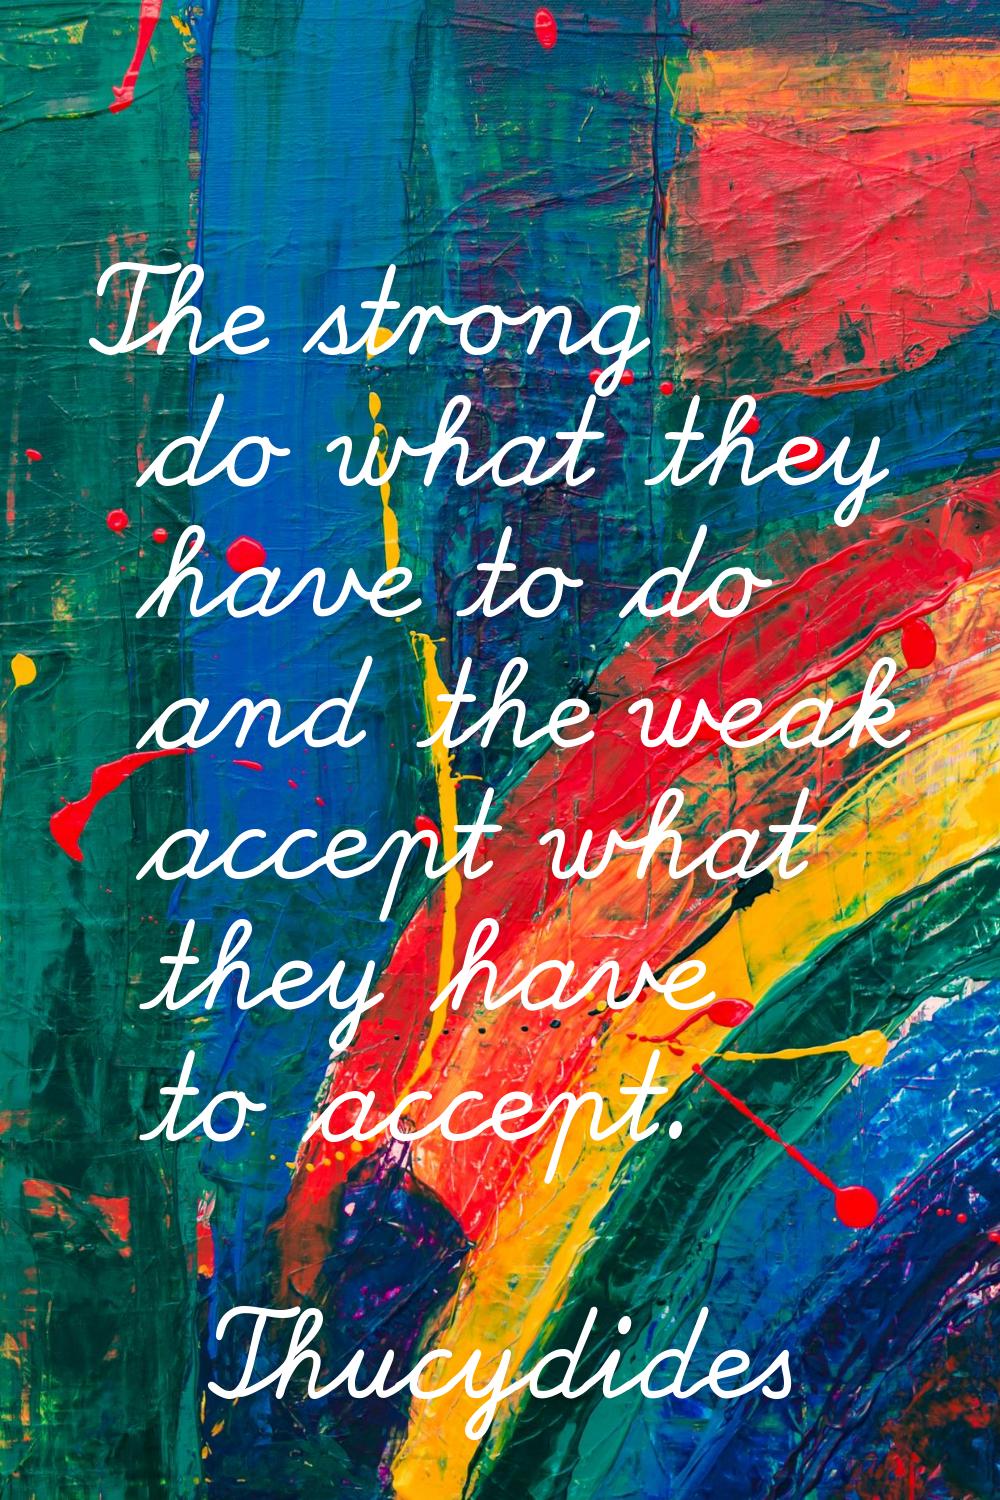 The strong do what they have to do and the weak accept what they have to accept.